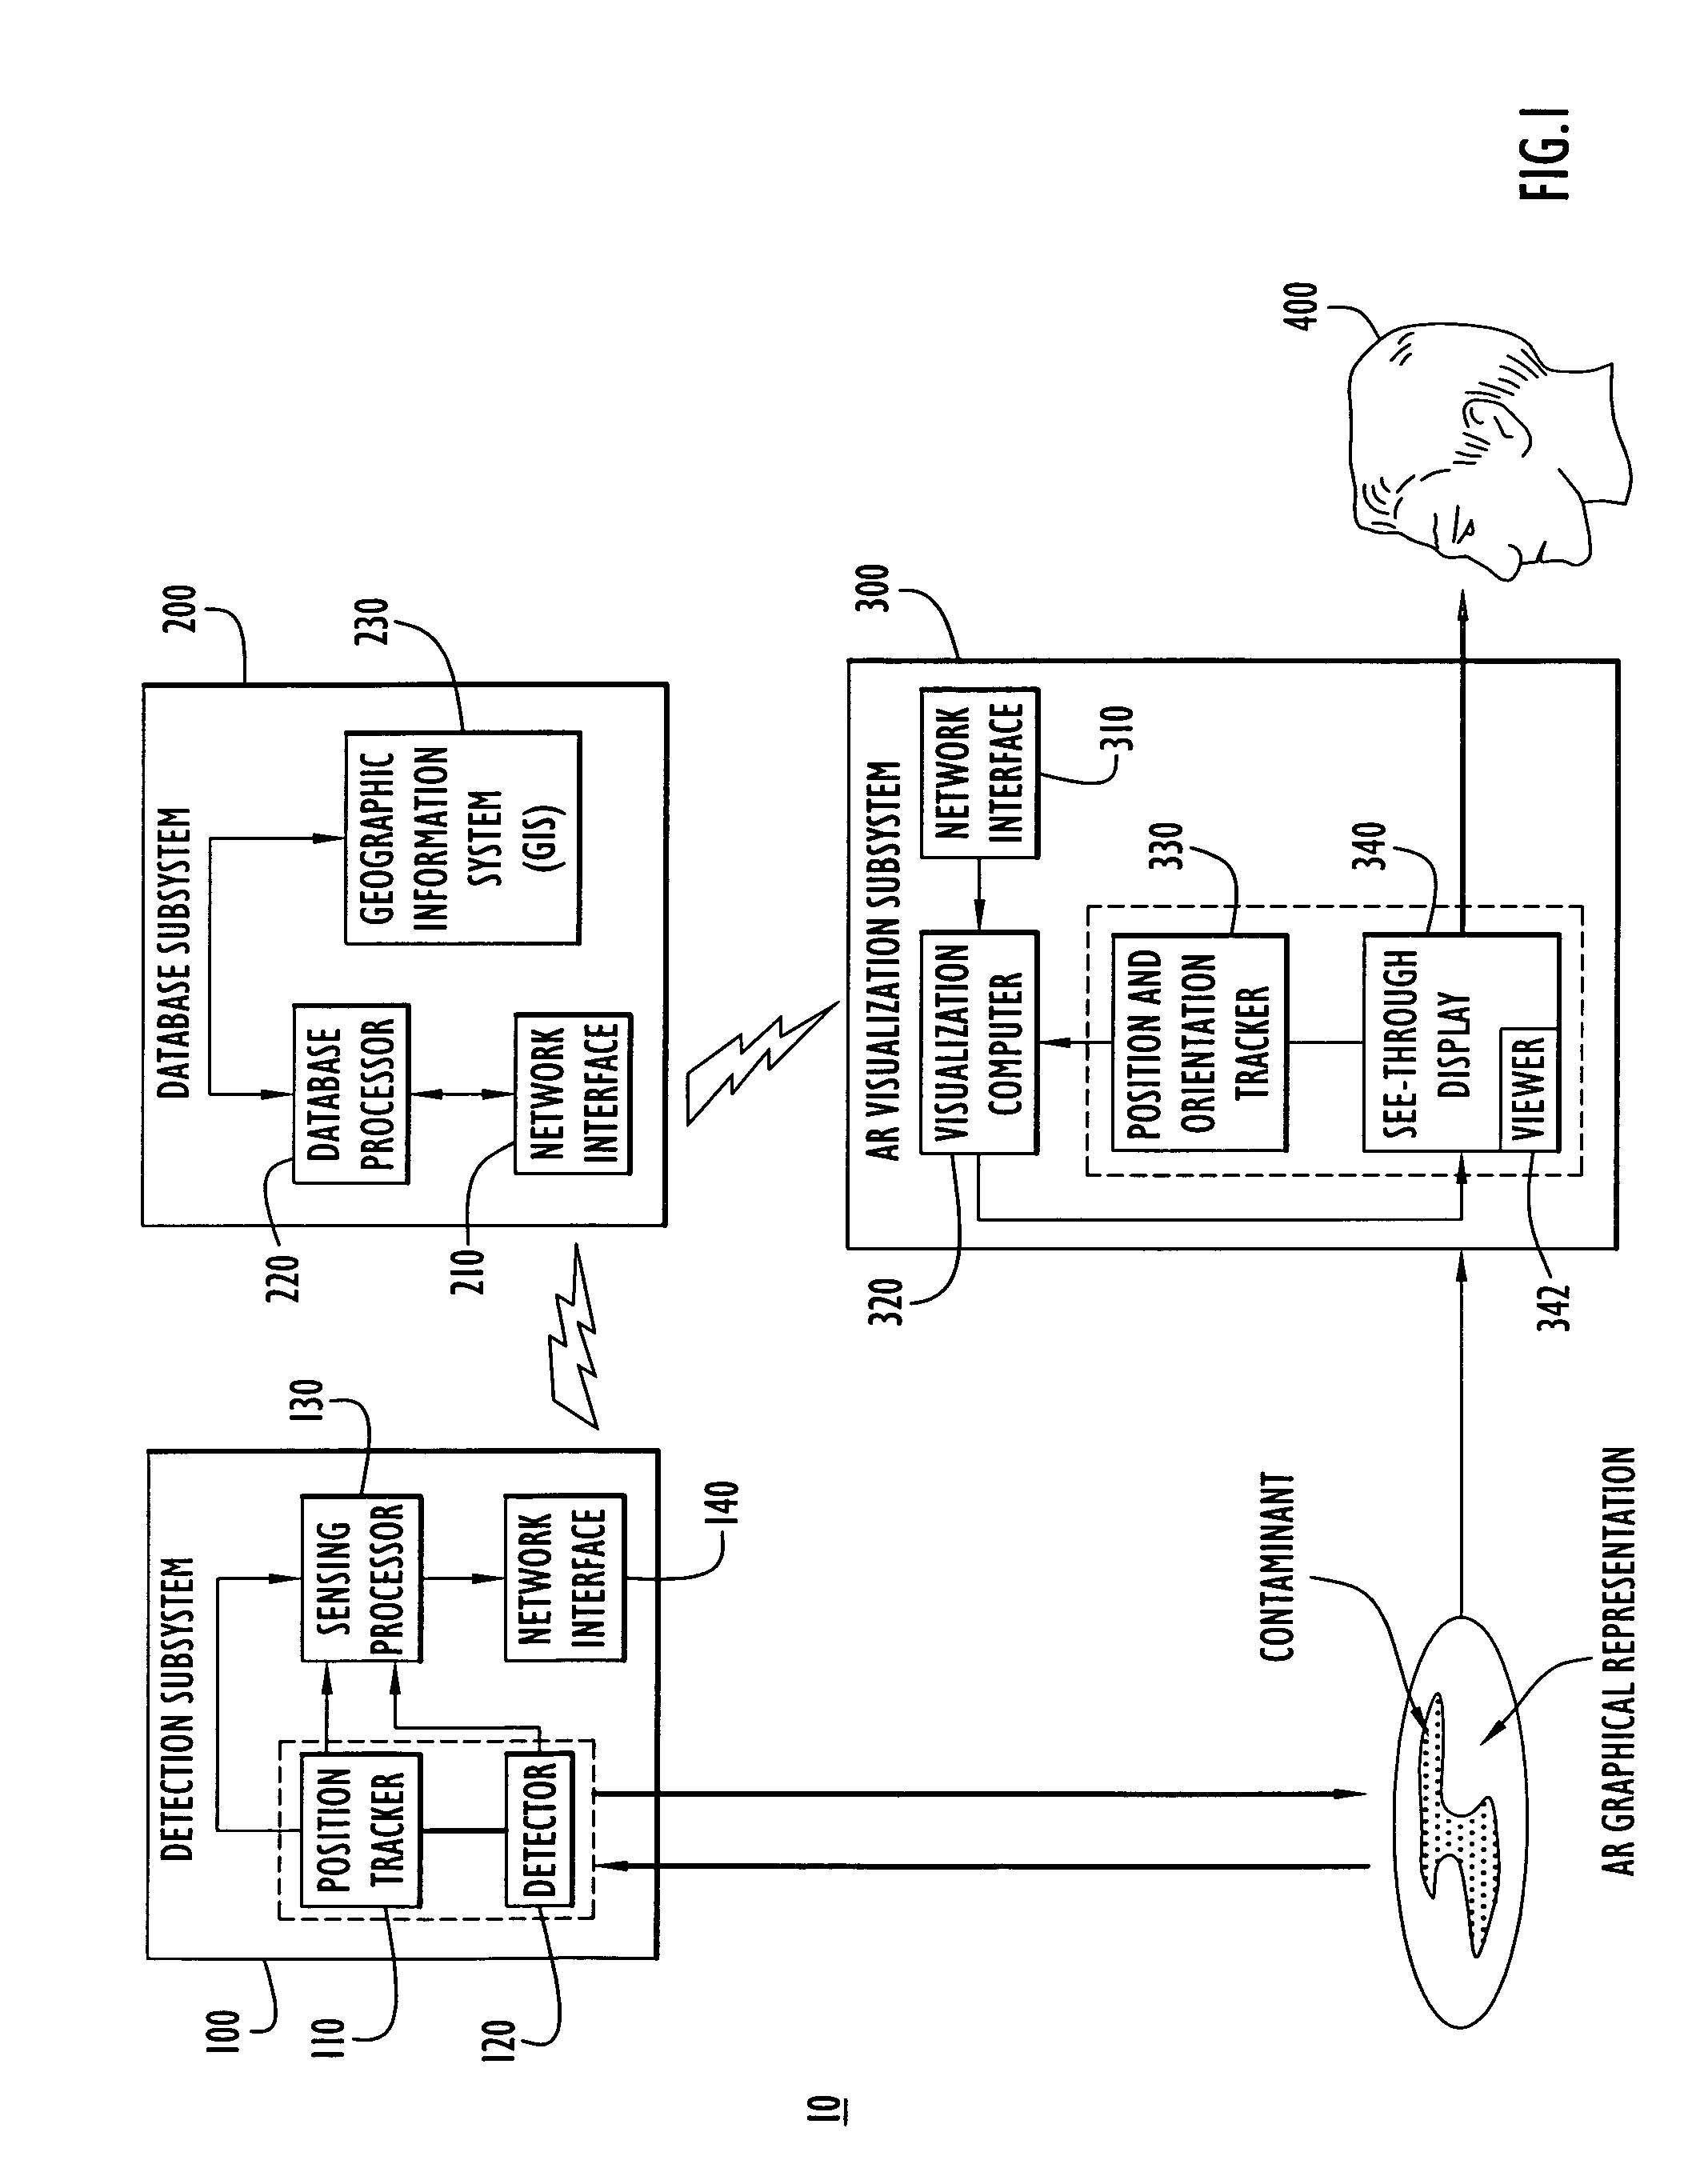 Method and system for geo-referencing and visualization of detected contaminants